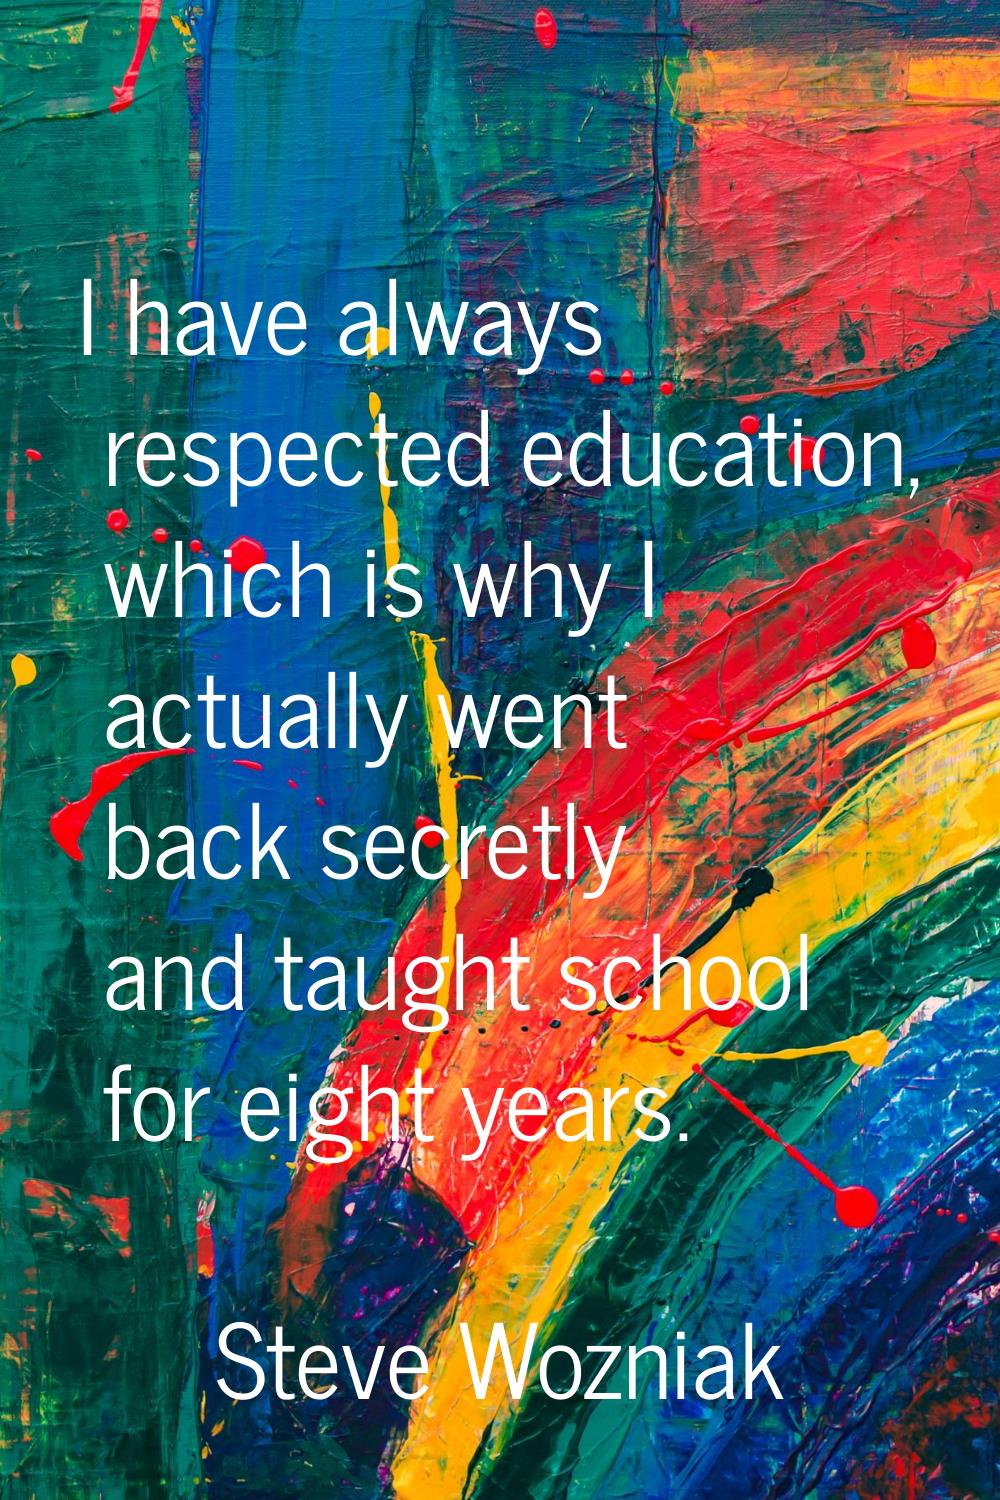 I have always respected education, which is why I actually went back secretly and taught school for